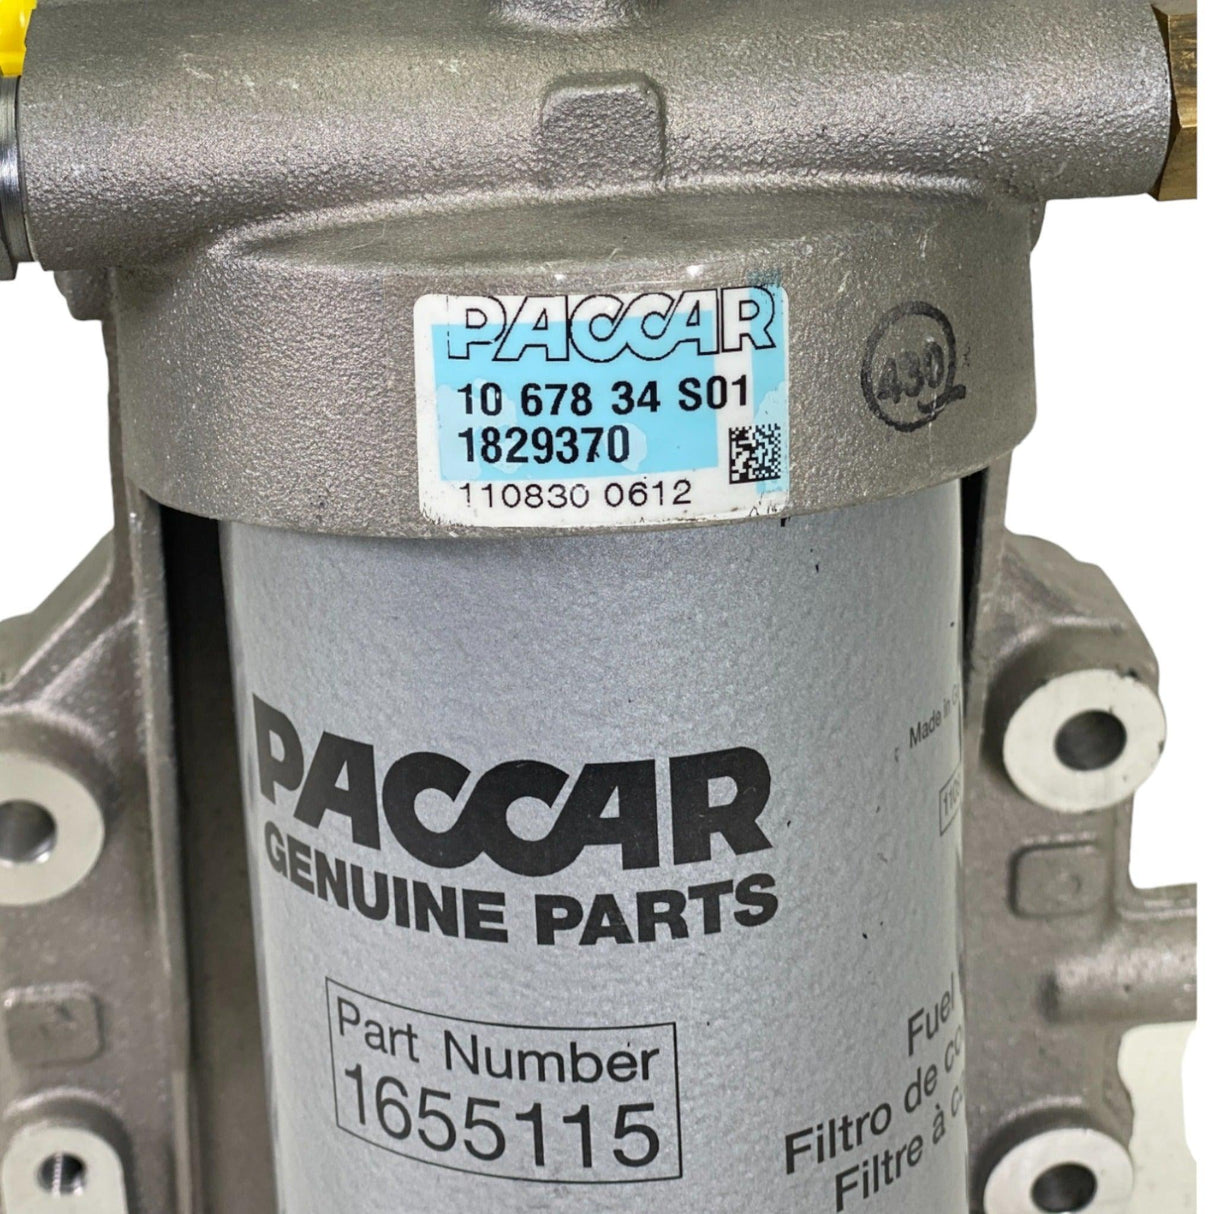 1829370 Genuine Paccar Fuel Filter Assembly - Truck To Trailer